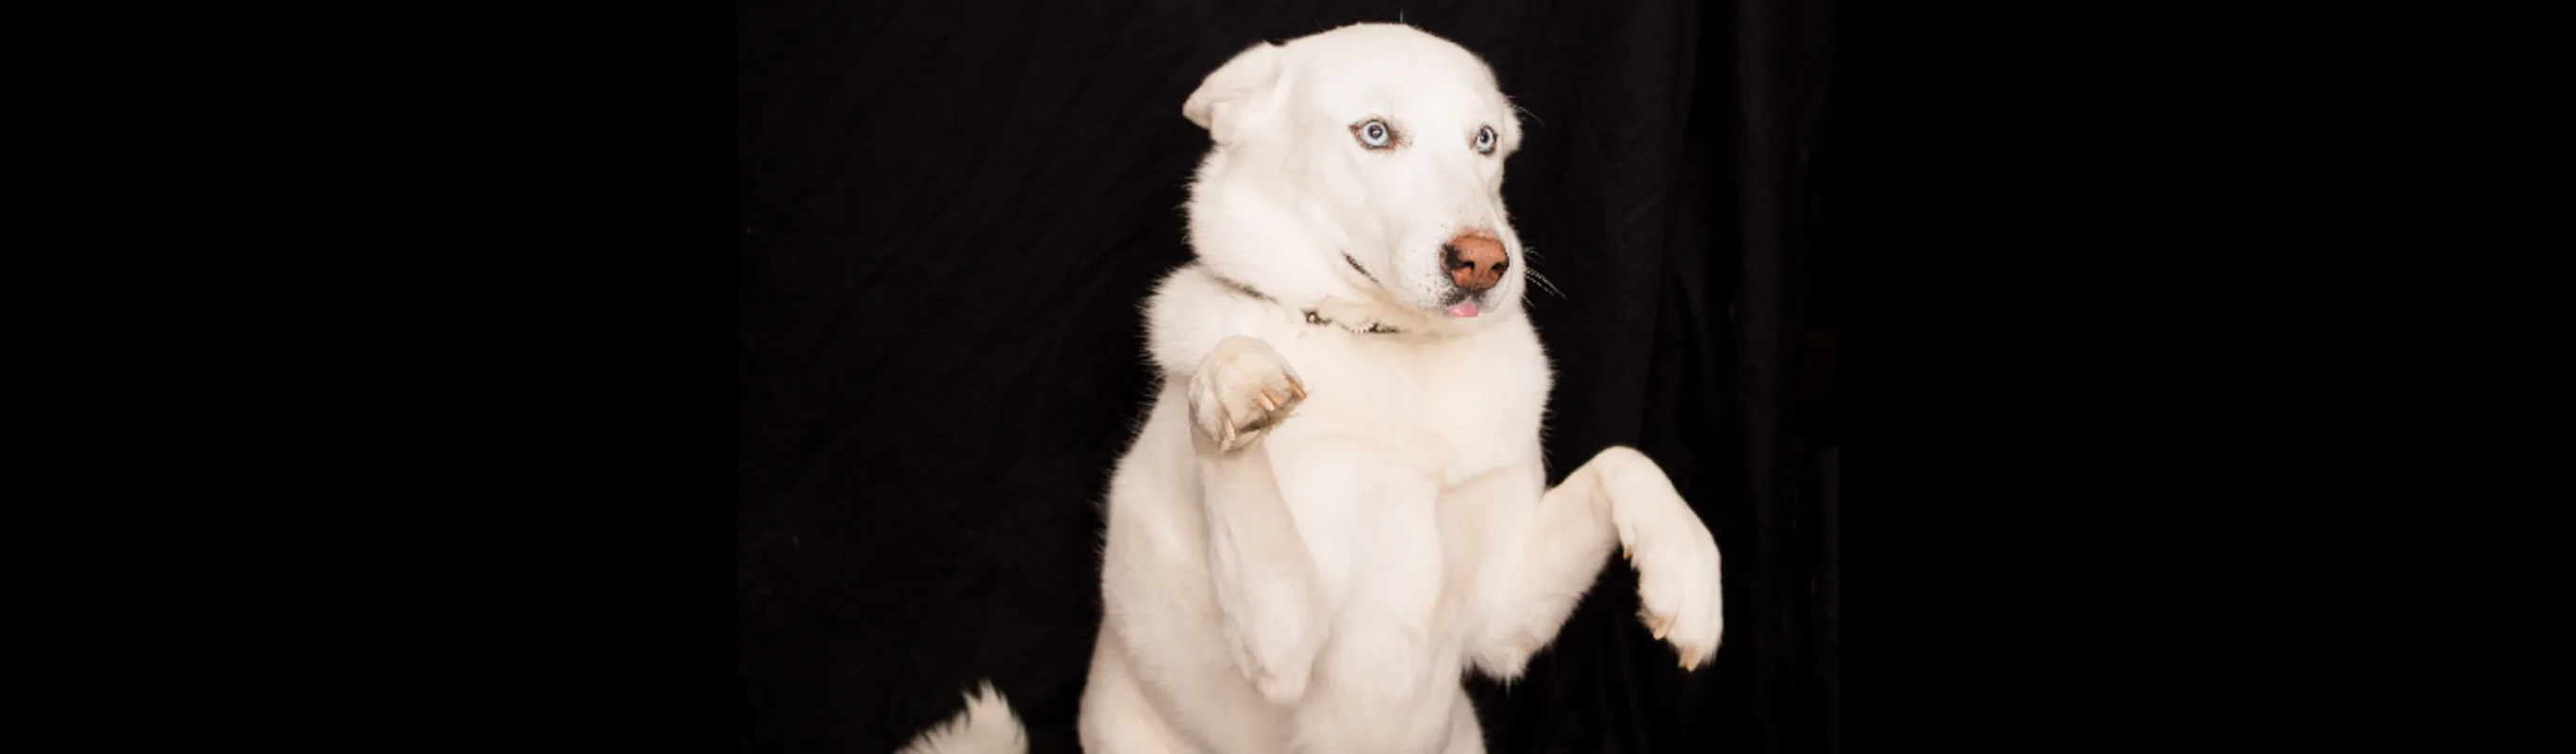 A photo of a derpy white husky standing on her hind legs